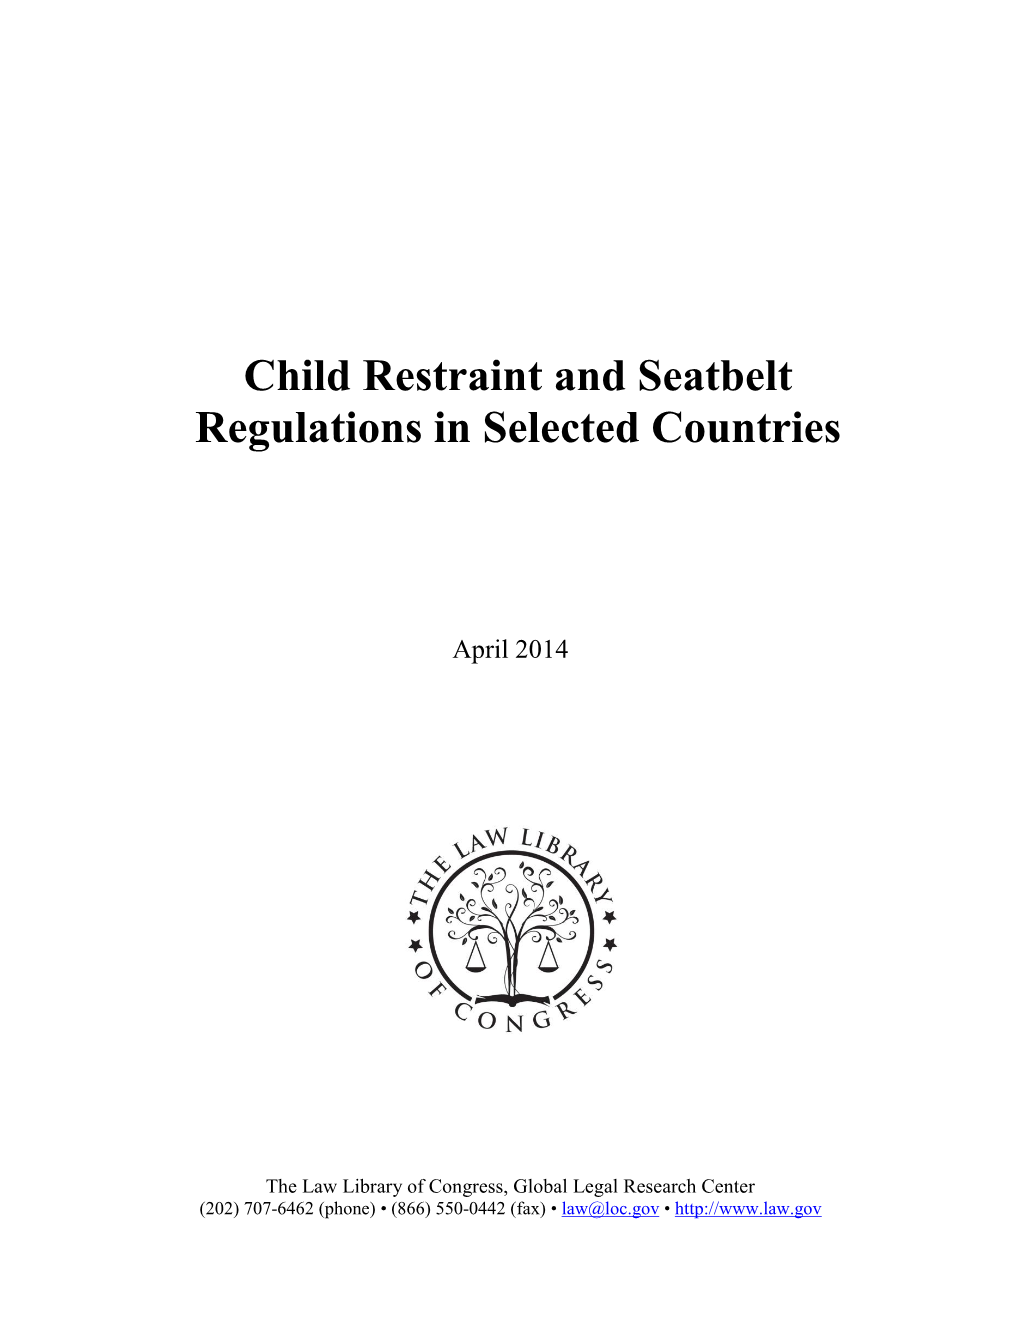 Child Restraint and Seatbelt Regulations in Selected Countries